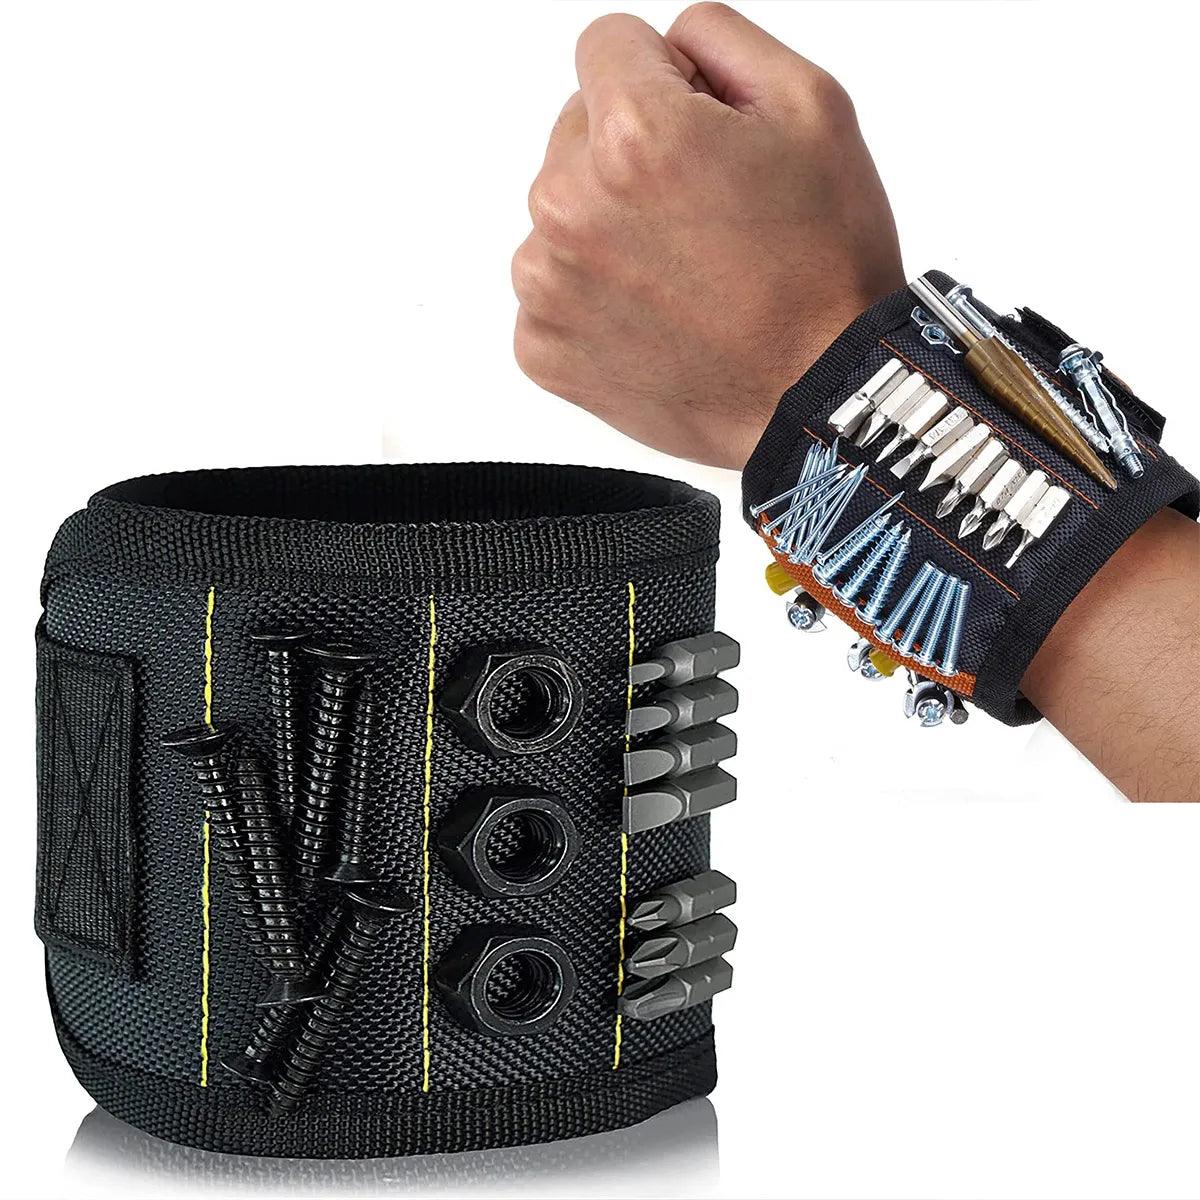 Magnetic Wrist Tool Holder Belt with Enhanced Magnet Strength - Hands-Free Screws, Nails, and Drilling Bits Organizer  ourlum.com   